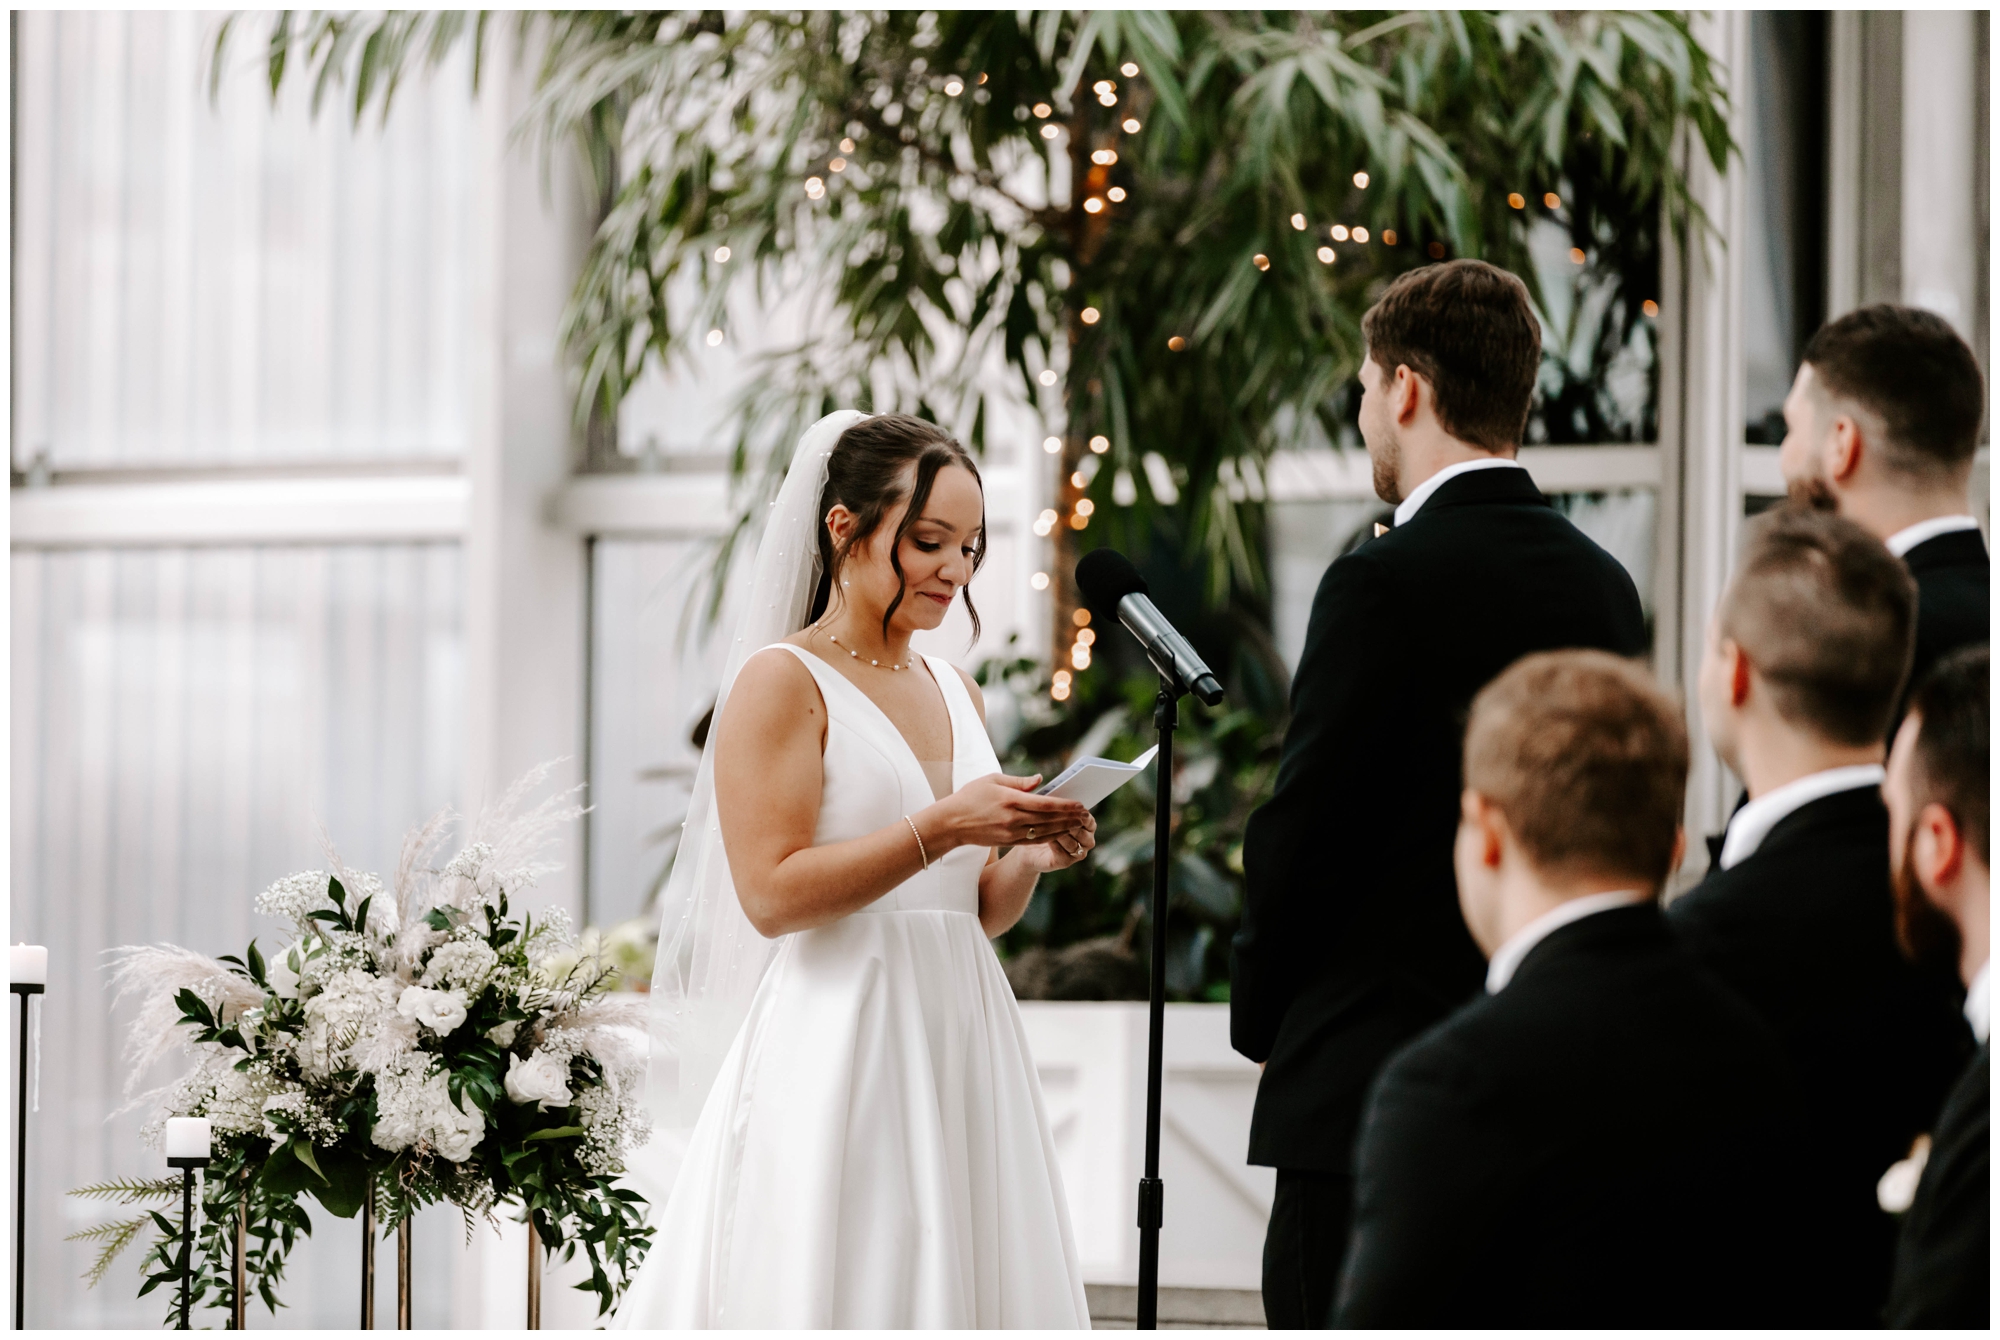 The Wintergarden at PPG Place Pittsburgh wedding